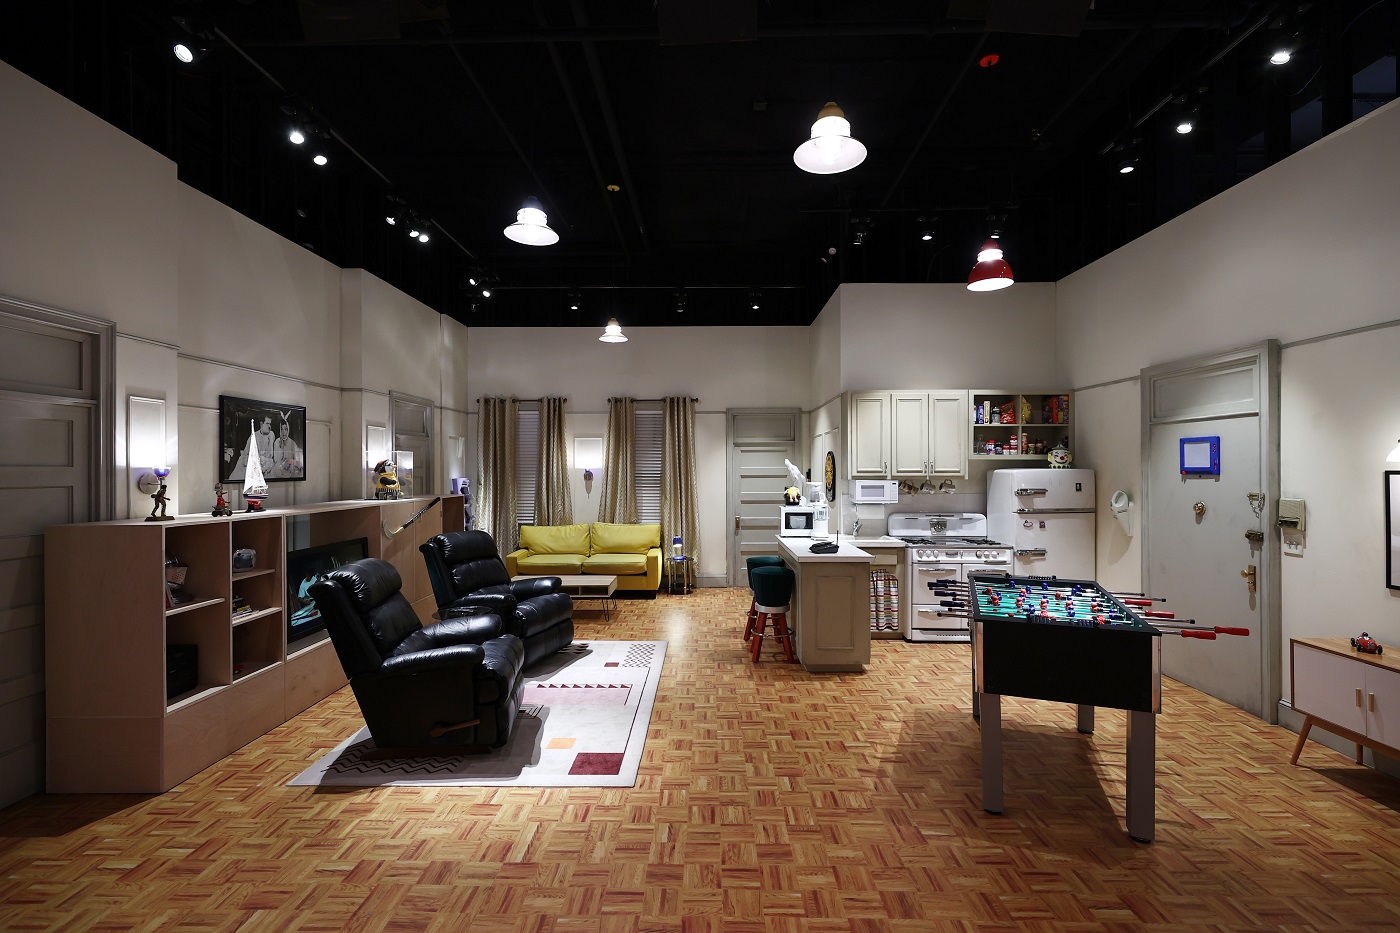 Chandler and Joey's apartment on display at the opening of the Flagship FRIENDS Experience on March 15, 2021